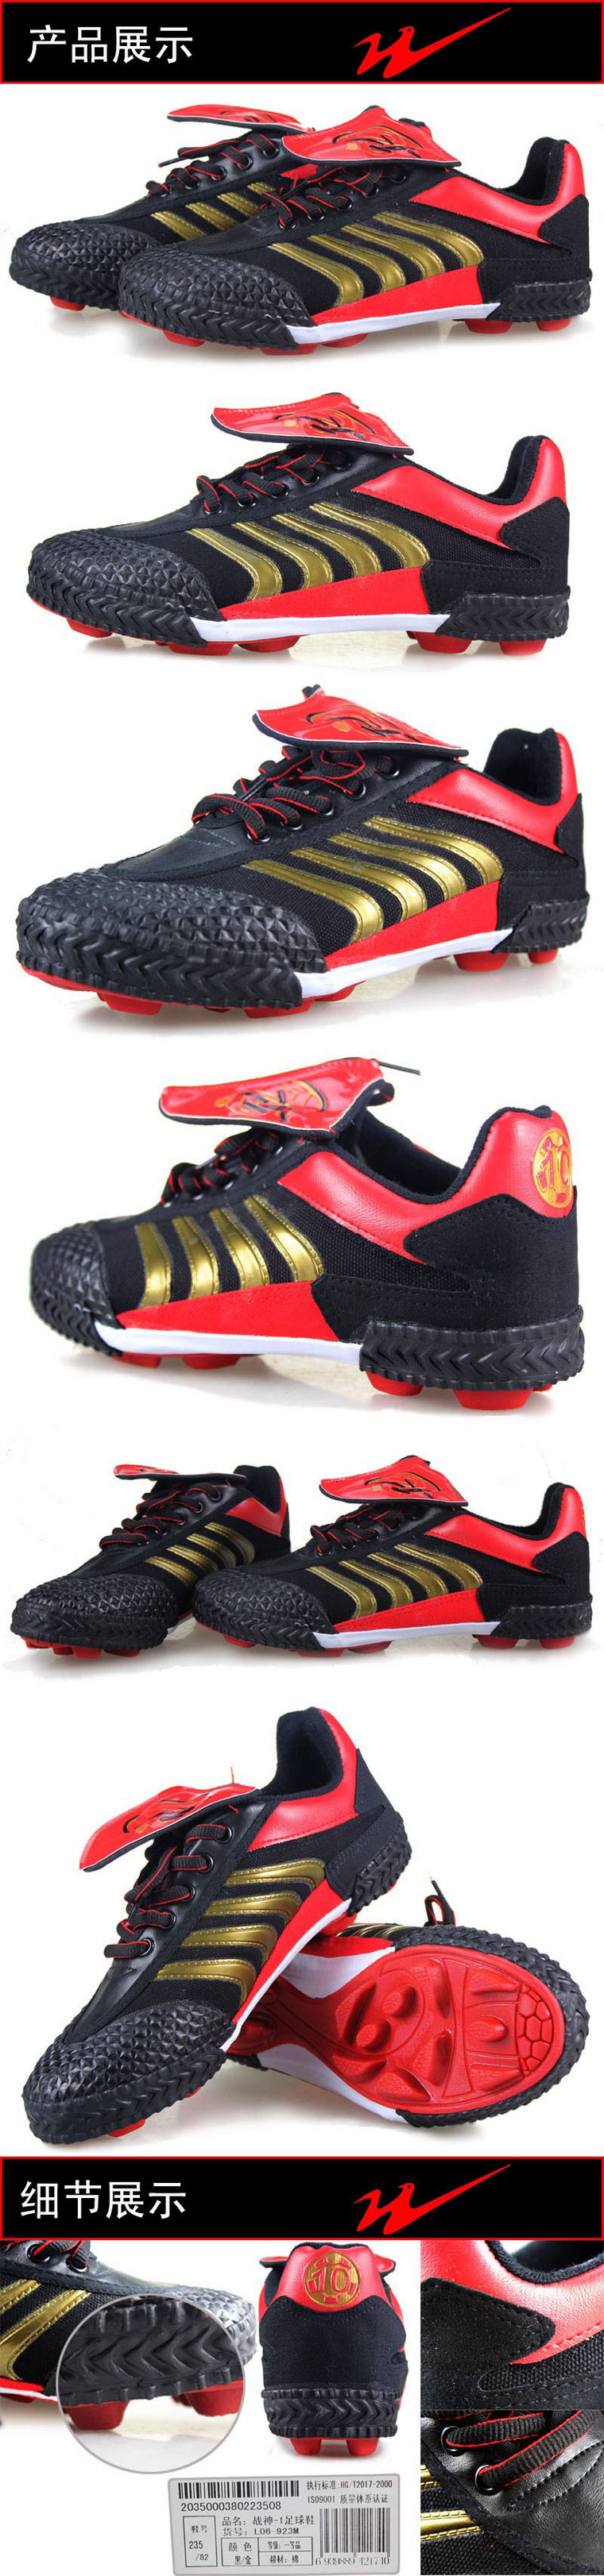 Chaussures de football DOUBLE STAR - Ref 2441602 Image 29